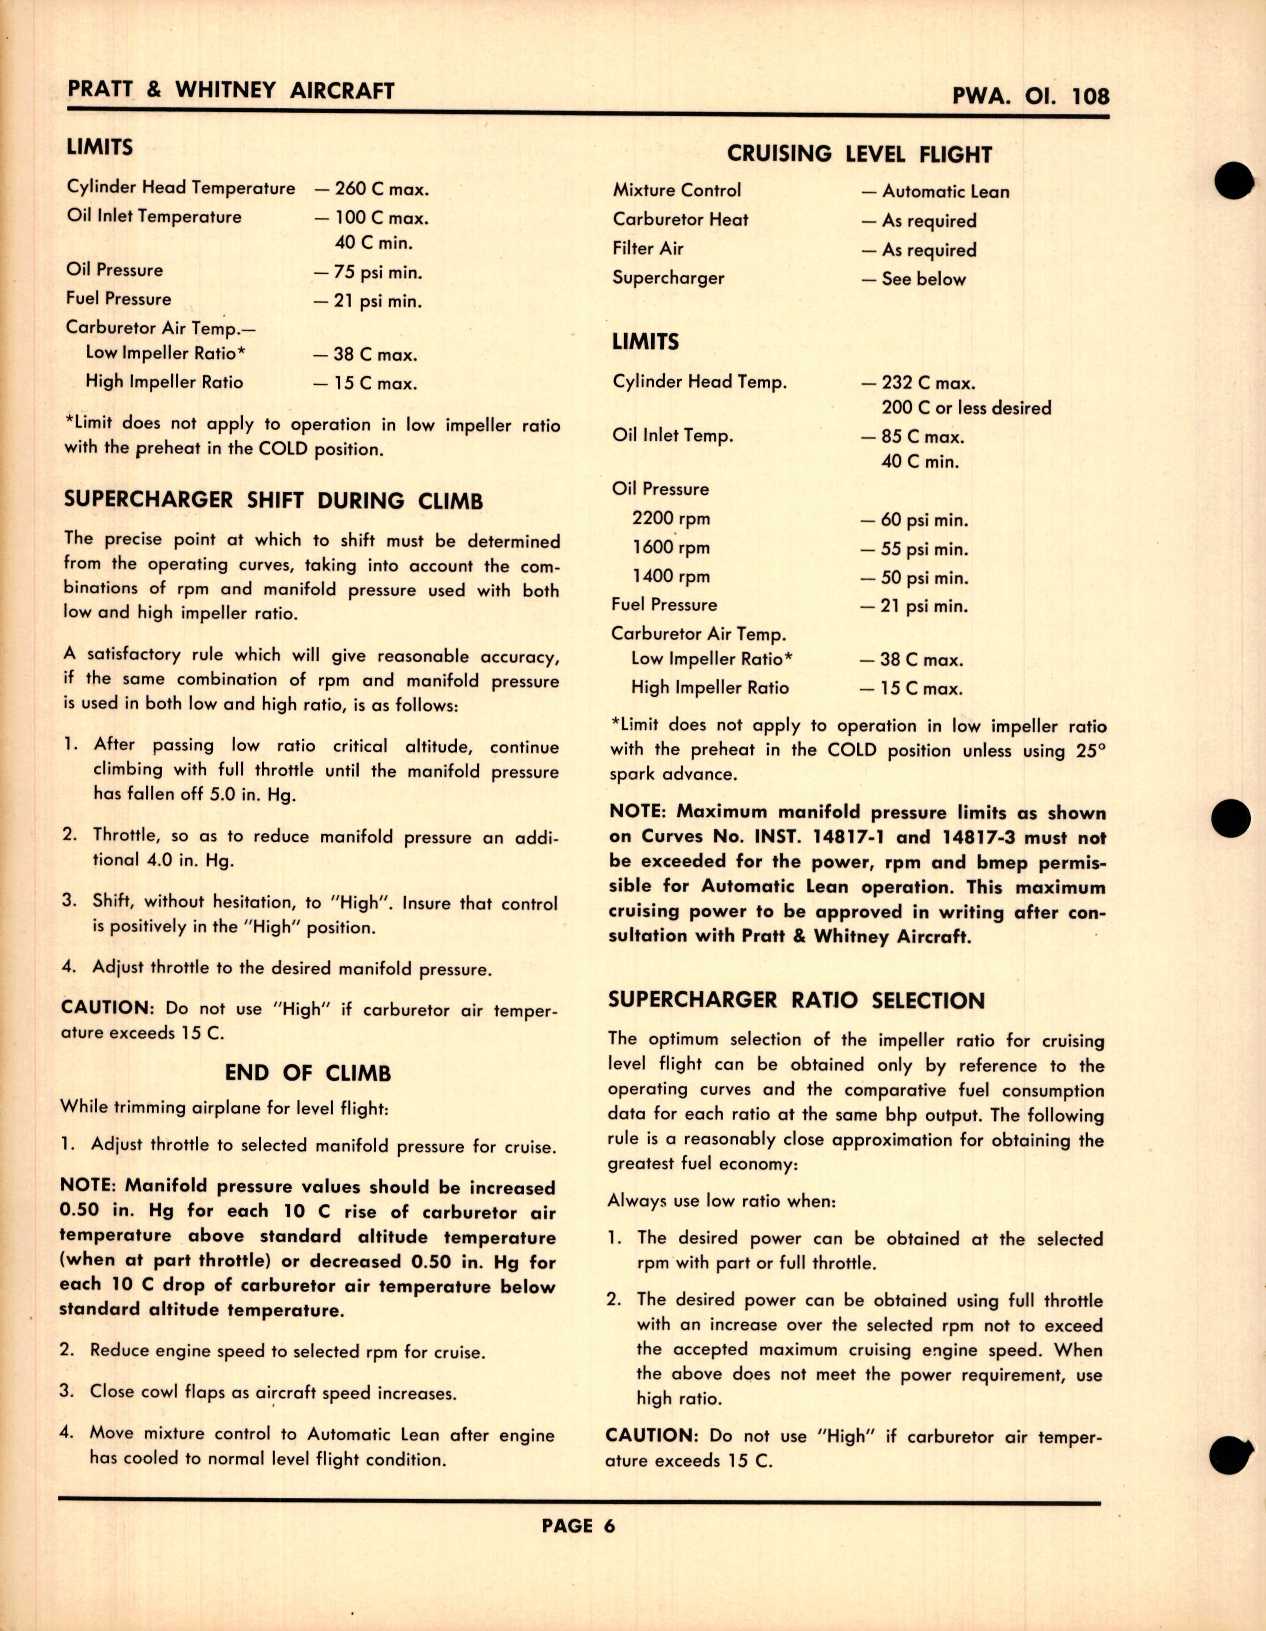 Sample page 6 from AirCorps Library document: Specific Operating Instructions for Double Wasp CB16